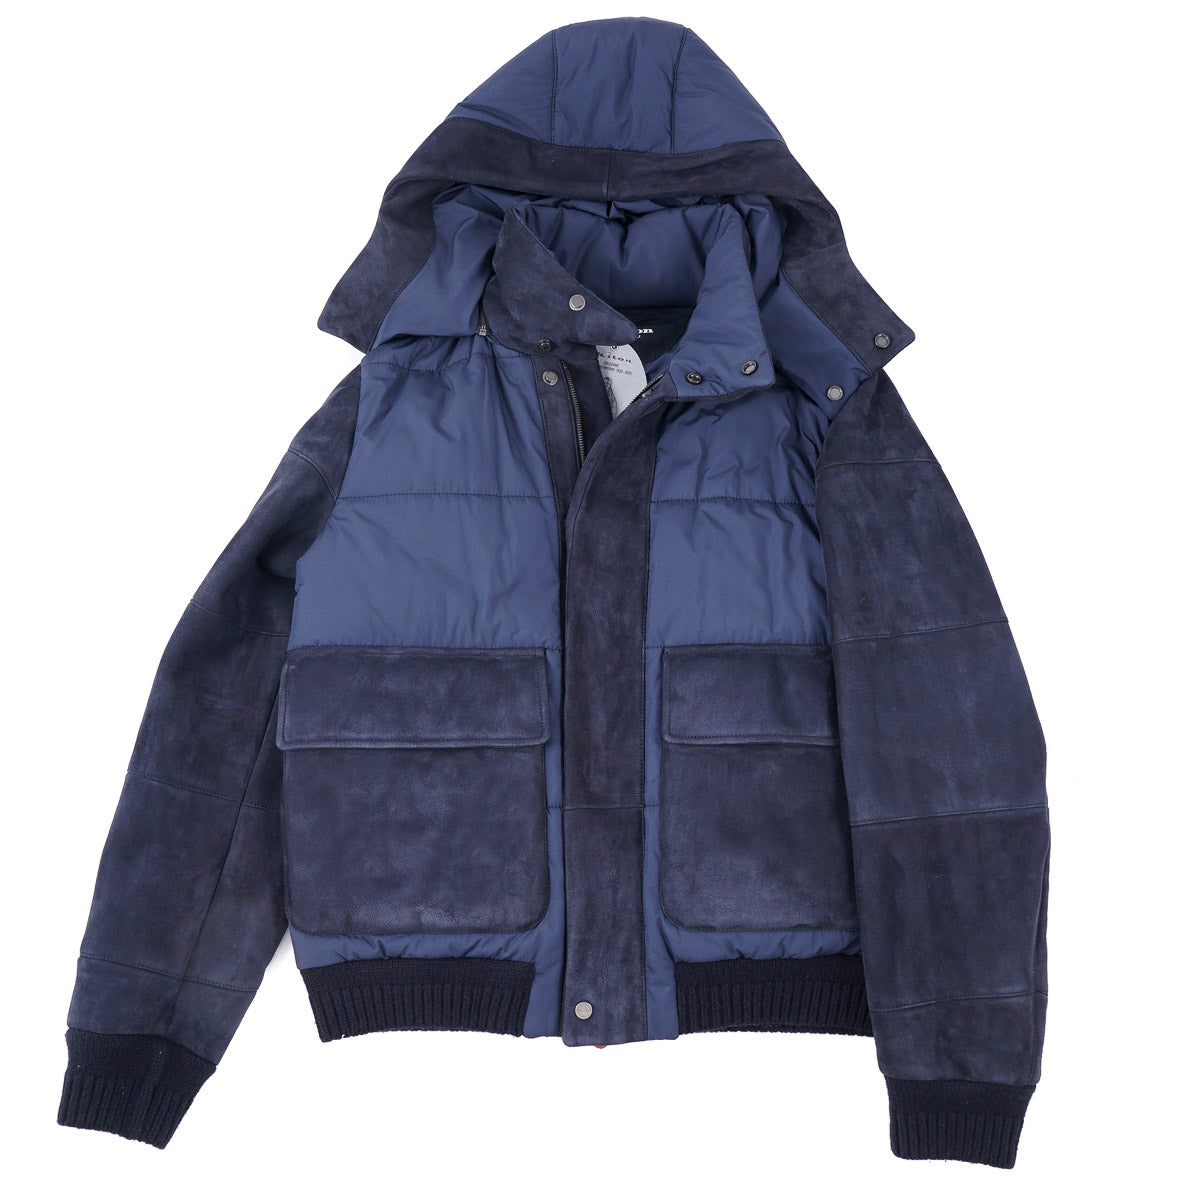 Kiton Down-Filled Hooded Puffer Jacket - Top Shelf Apparel